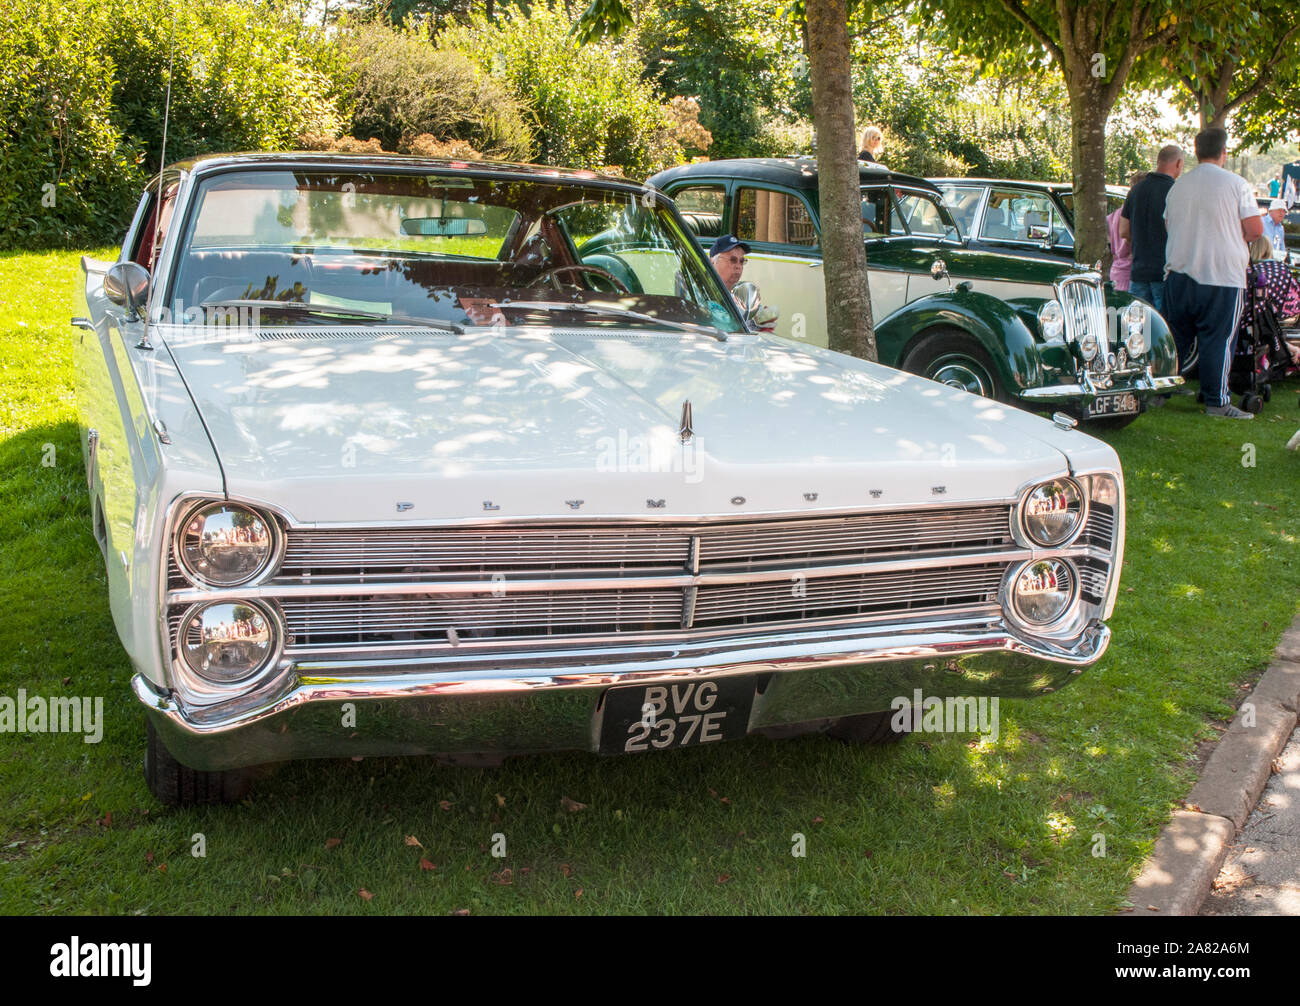 An American Plymouth Fury Automobile on show at the Classic Car Show Stanley Park Blackpool Lancashire England UK. Stock Photo